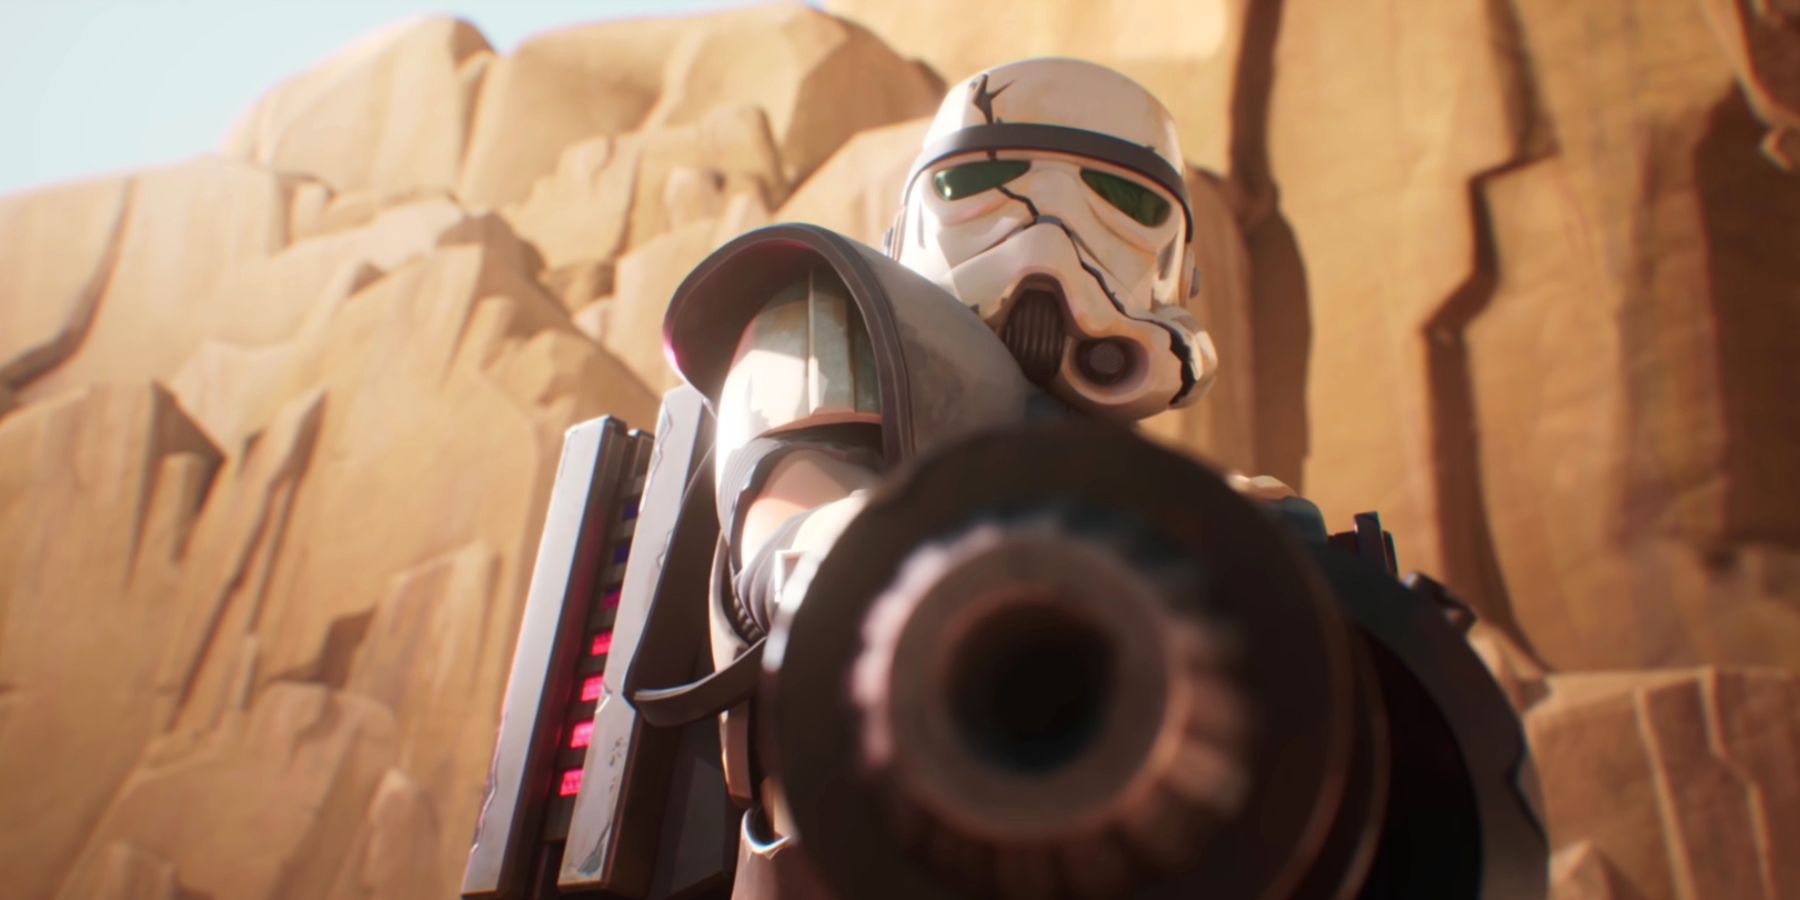 Star Wars: these are the eight video games that will be released in the coming years